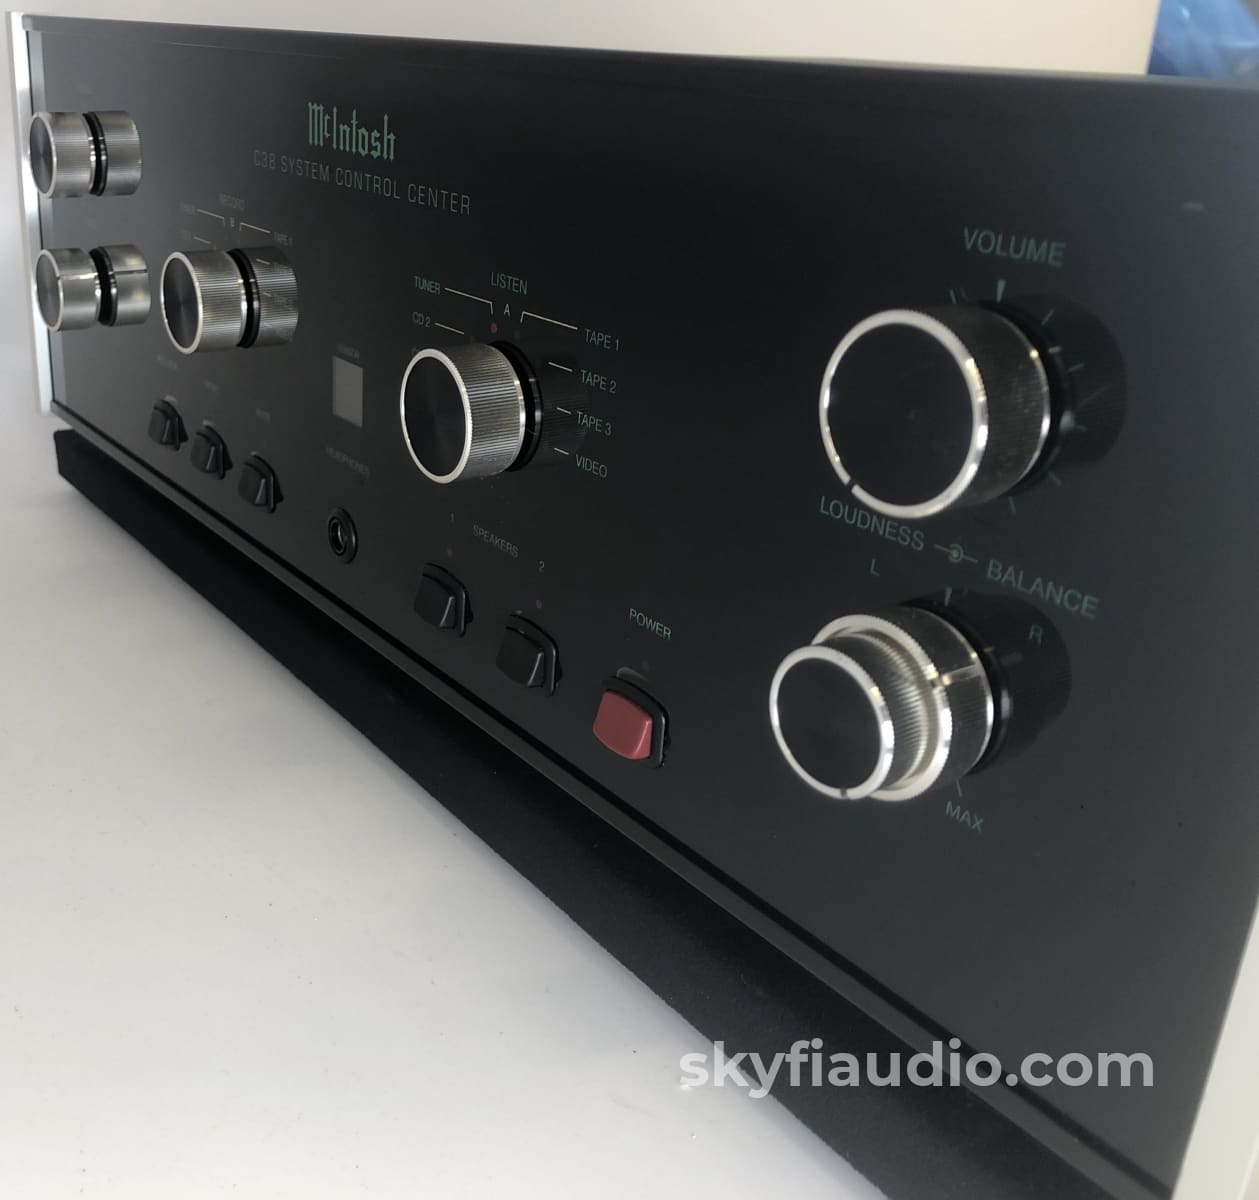 Mcintosh C38 Solid State Preamp - Full Featured Including Phono Stage With Remote Preamplifier